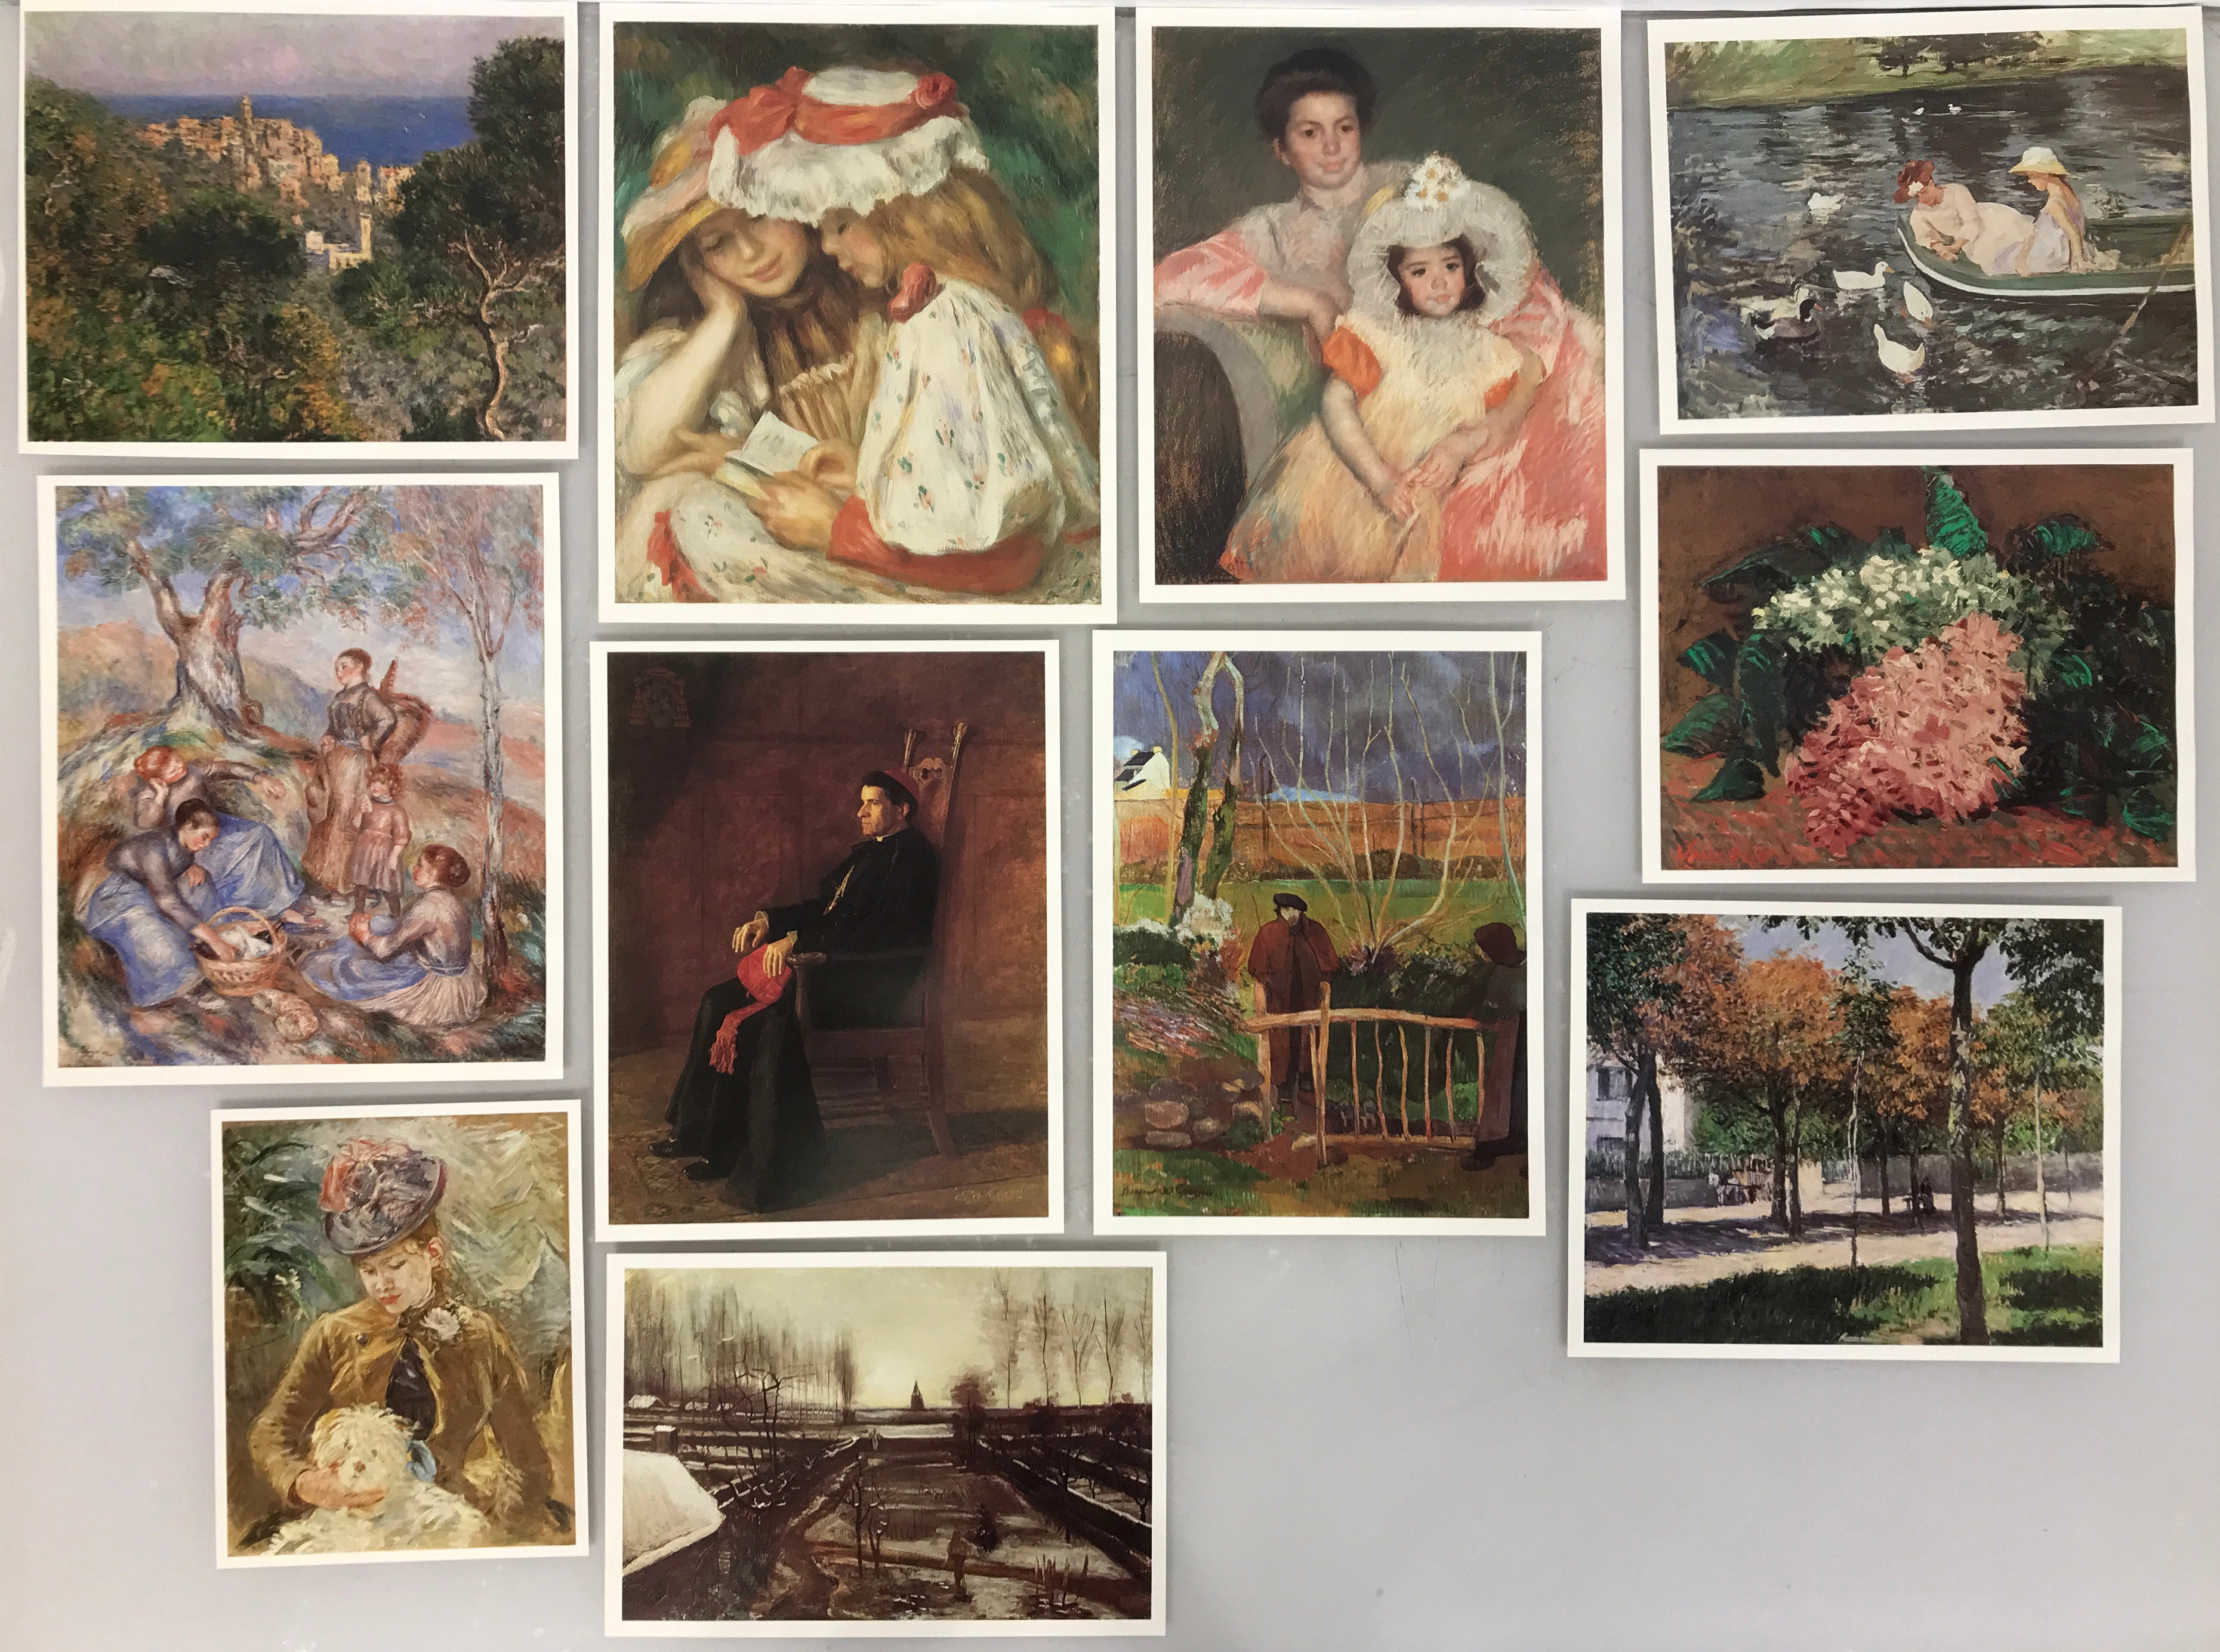 Assorted Prints from The Armand Hammer Collection